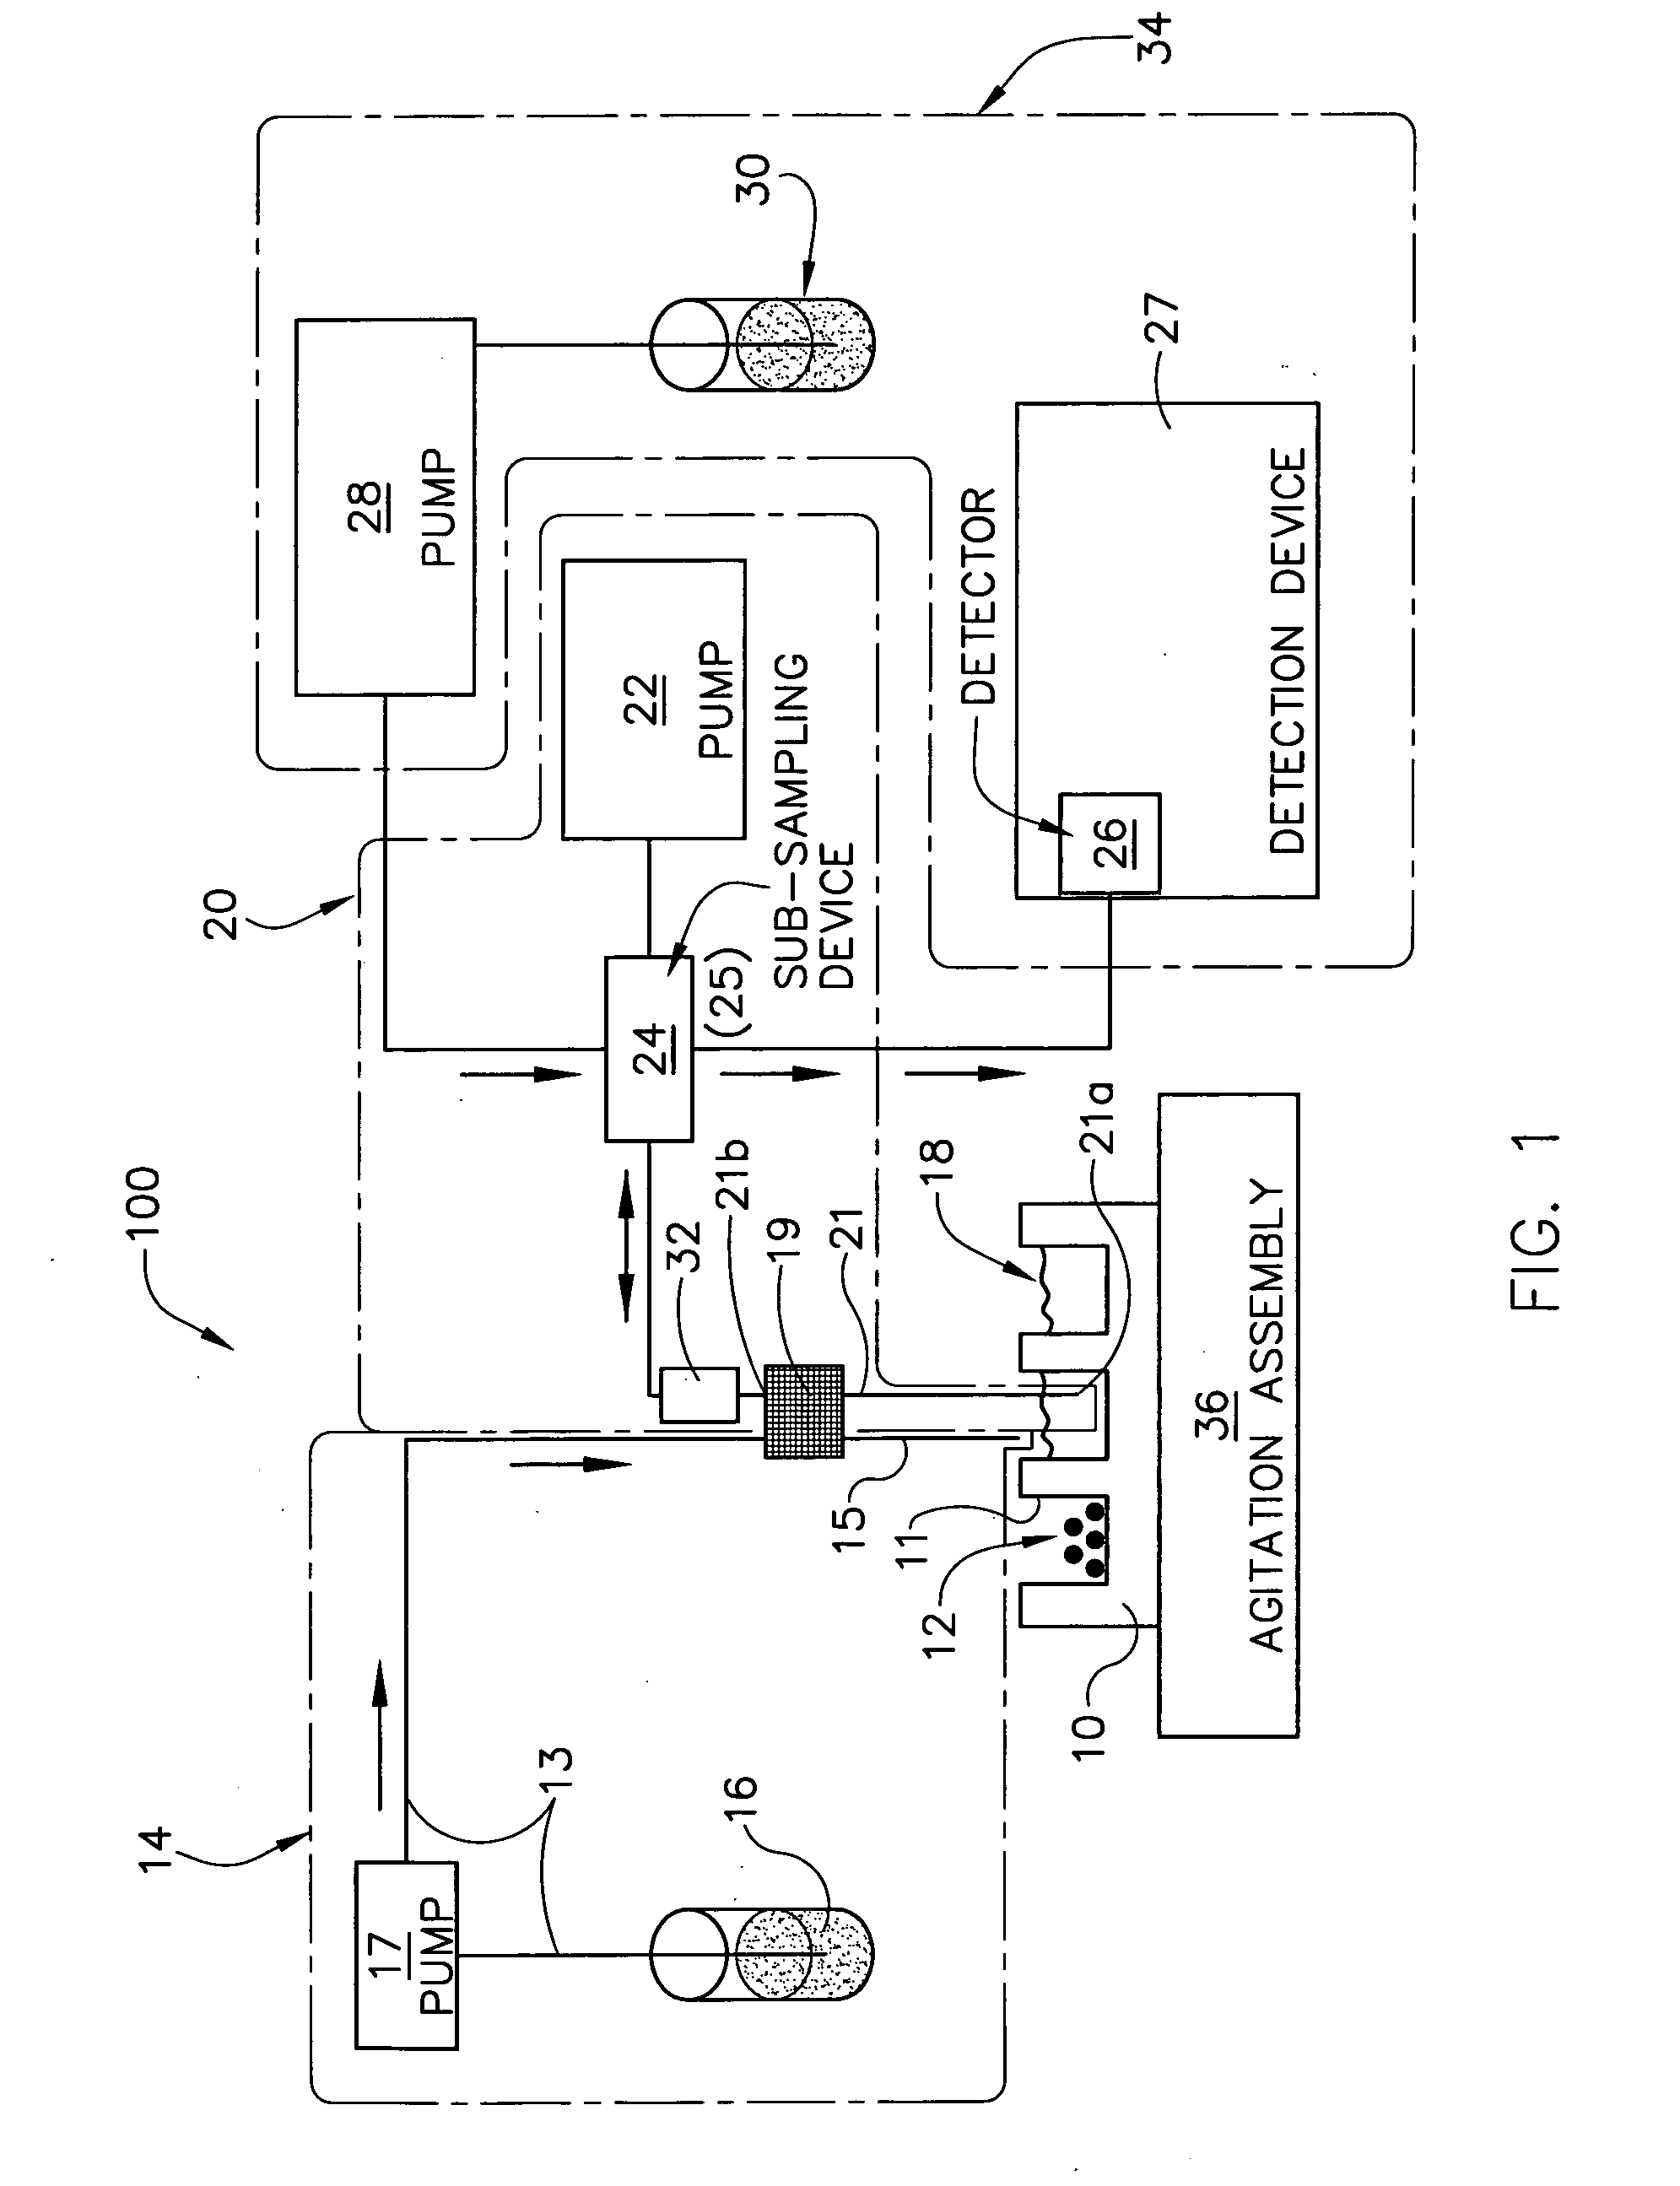 Methods and systems for dissolution testing